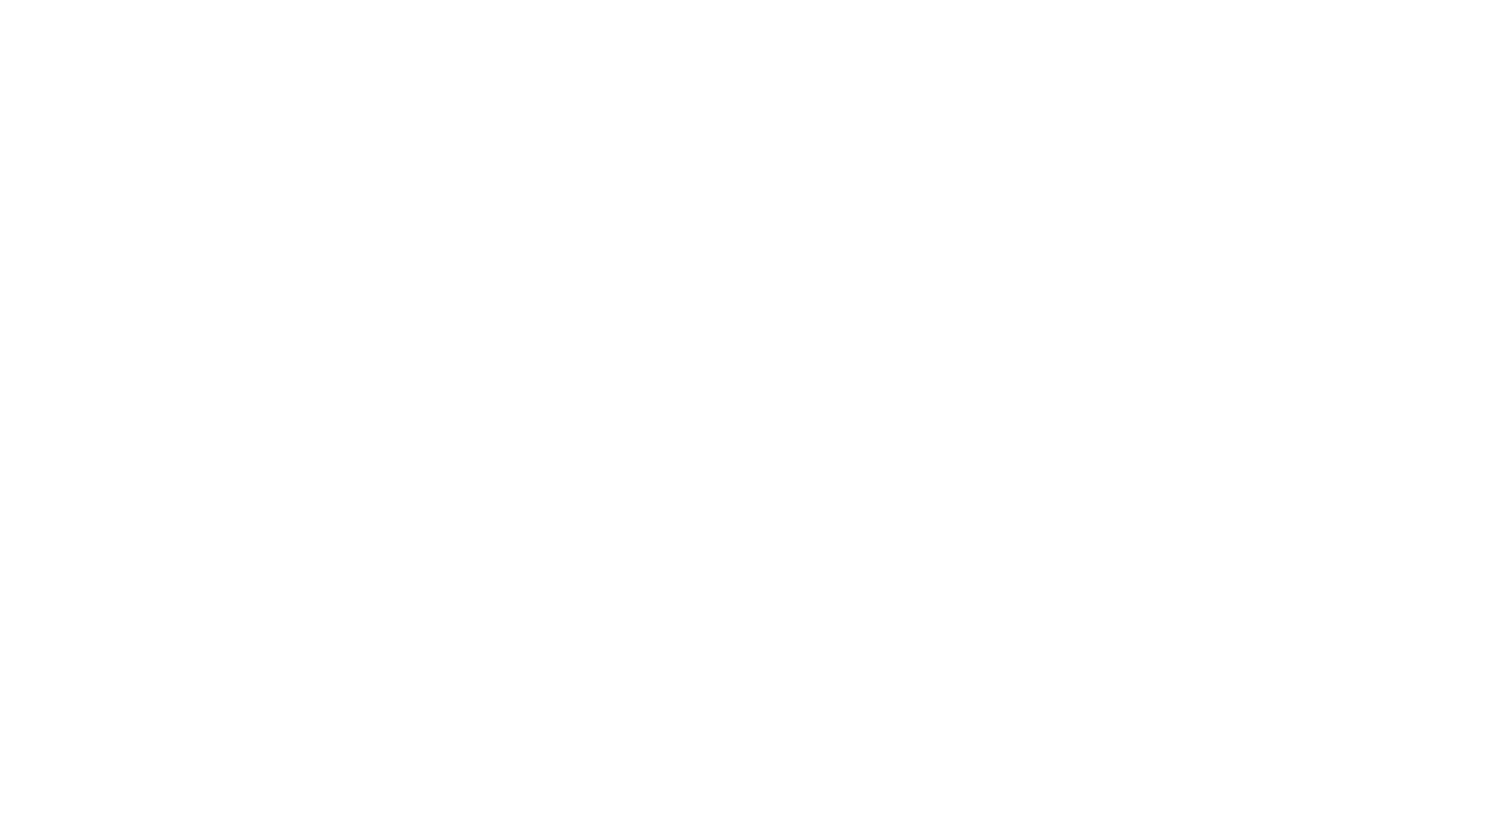 Taphouse Specialty Meat Market